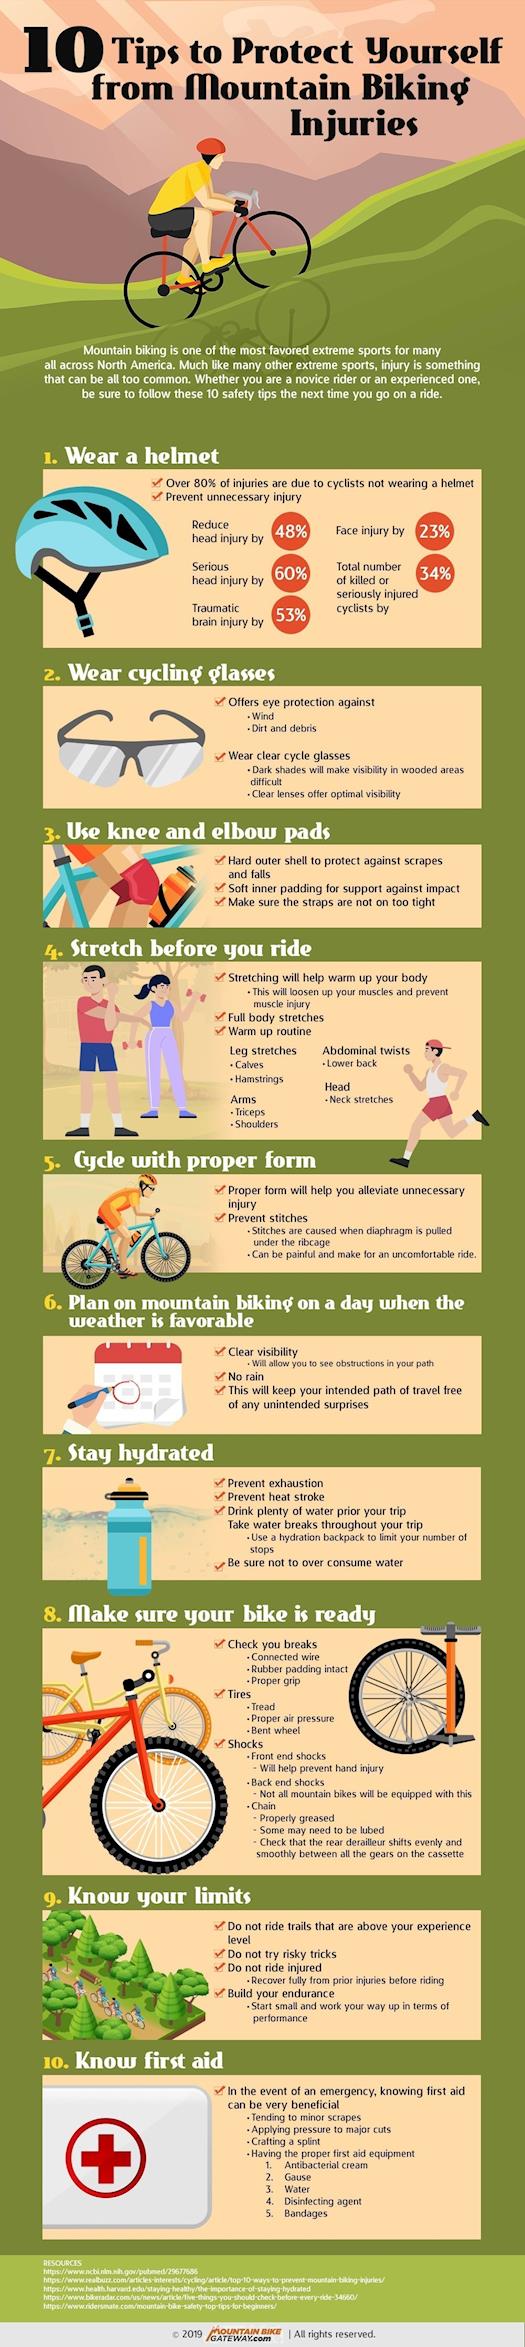 10 Tips to Protect Yourself From Mountain Biking Injuries